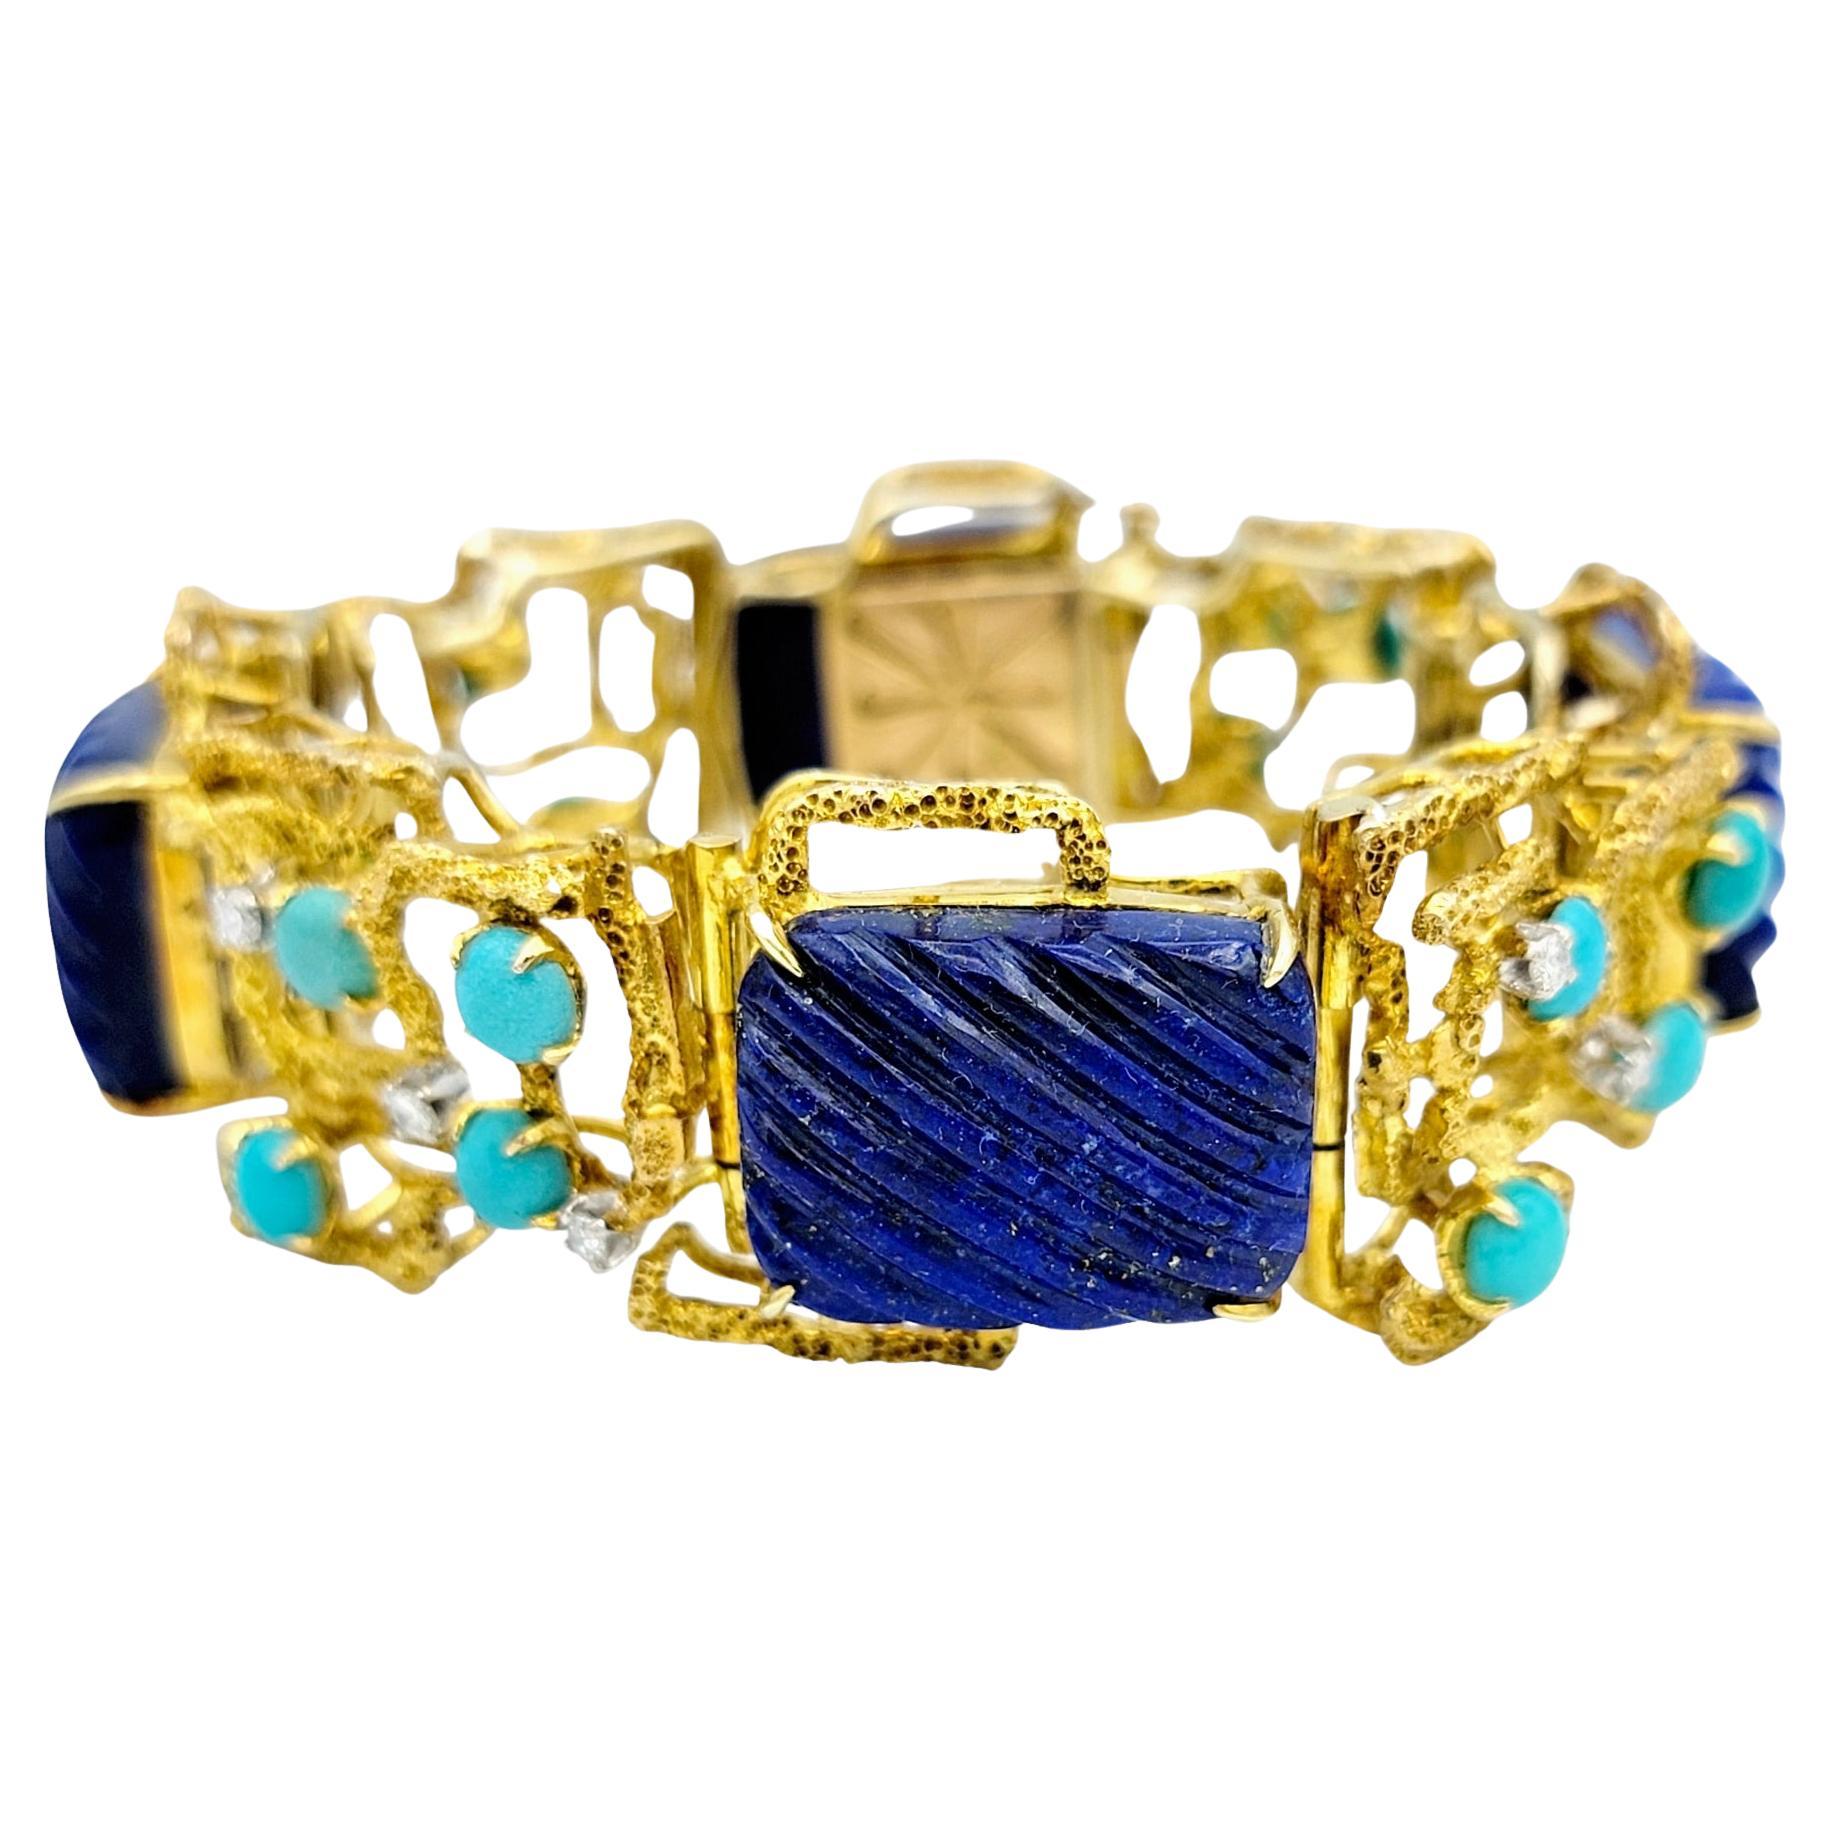 This unique and colorful chunky gold link bracelet is a captivating work of art, seamlessly blending geometric precision with the allure of natural gemstones. Each alternating link showcases a cushion-cut lapis lazuli gemstone, masterfully carved to